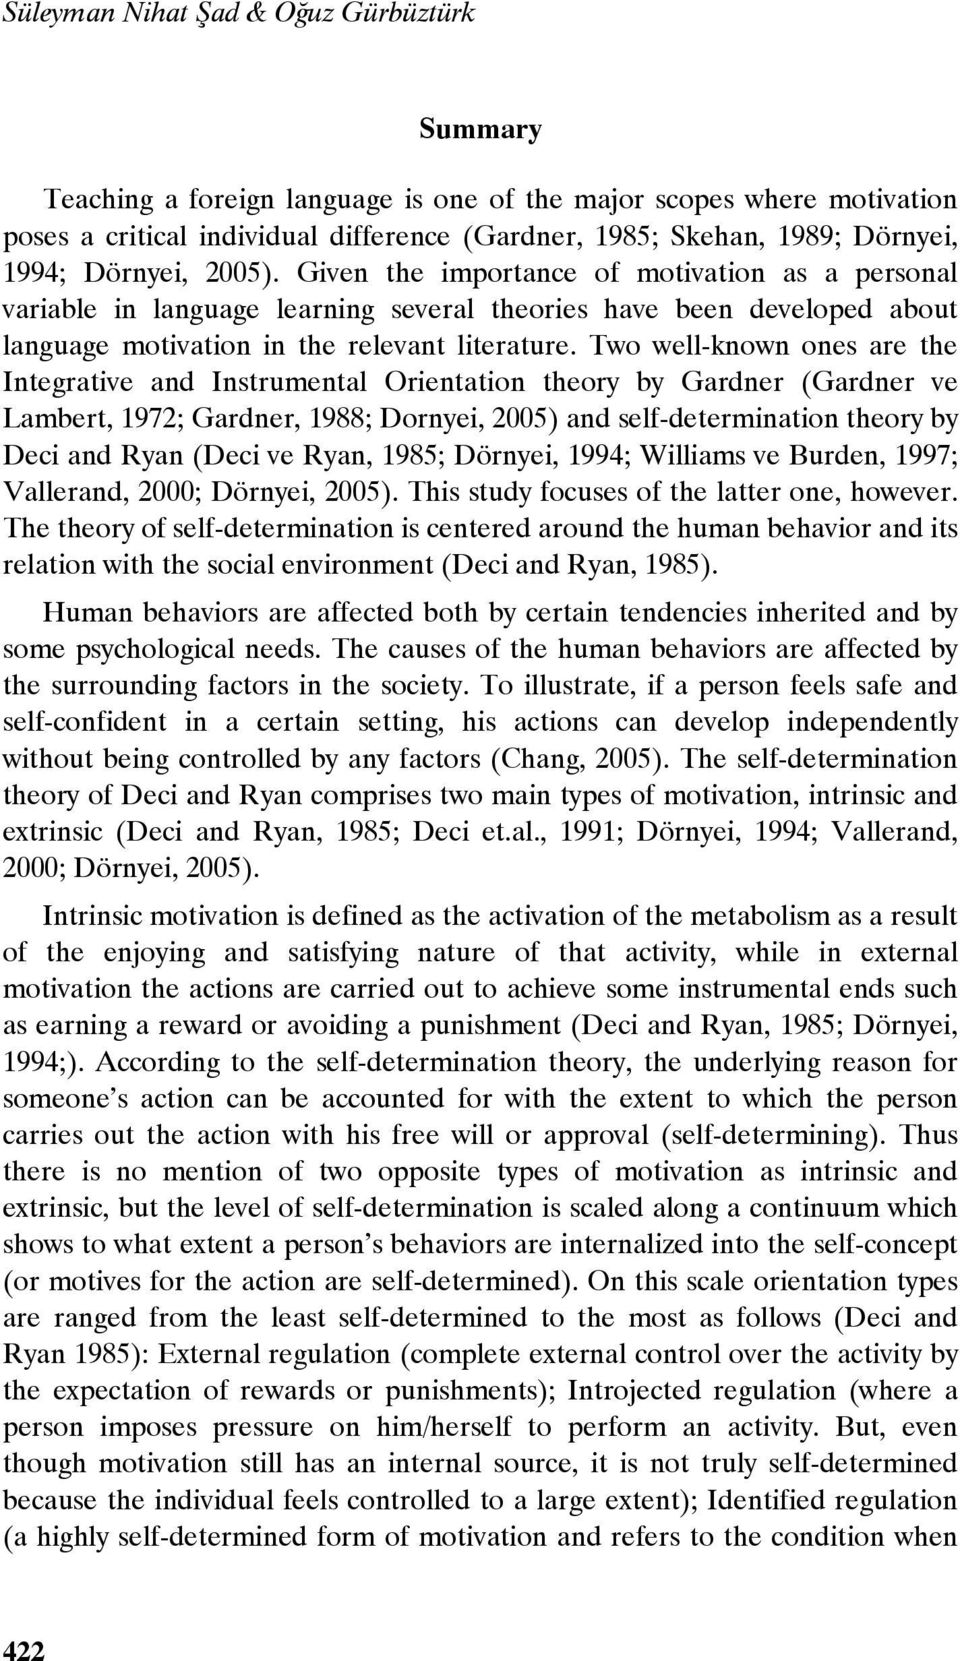 Two well-known ones are the Integrative and Instrumental Orientation theory by Gardner (Gardner ve Lambert, 1972; Gardner, 1988; Dornyei, 2005) and self-determination theory by Deci and Ryan (Deci ve